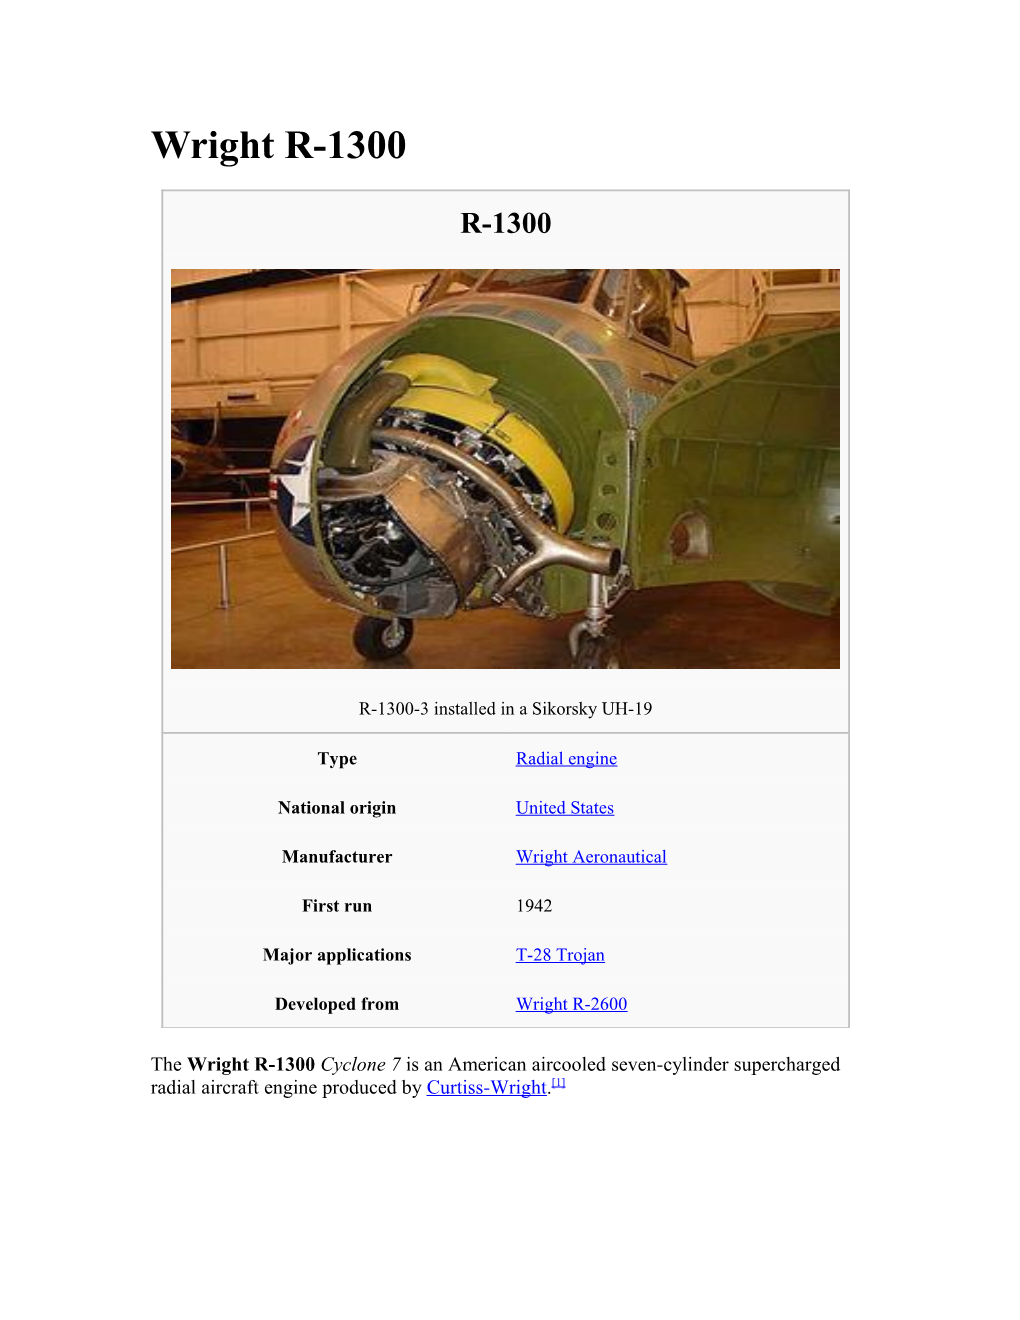 For Use in Helicopters the R-1300-3 Was Derated to 690.3 Hp (515 Kw) and Uses Forced-Air